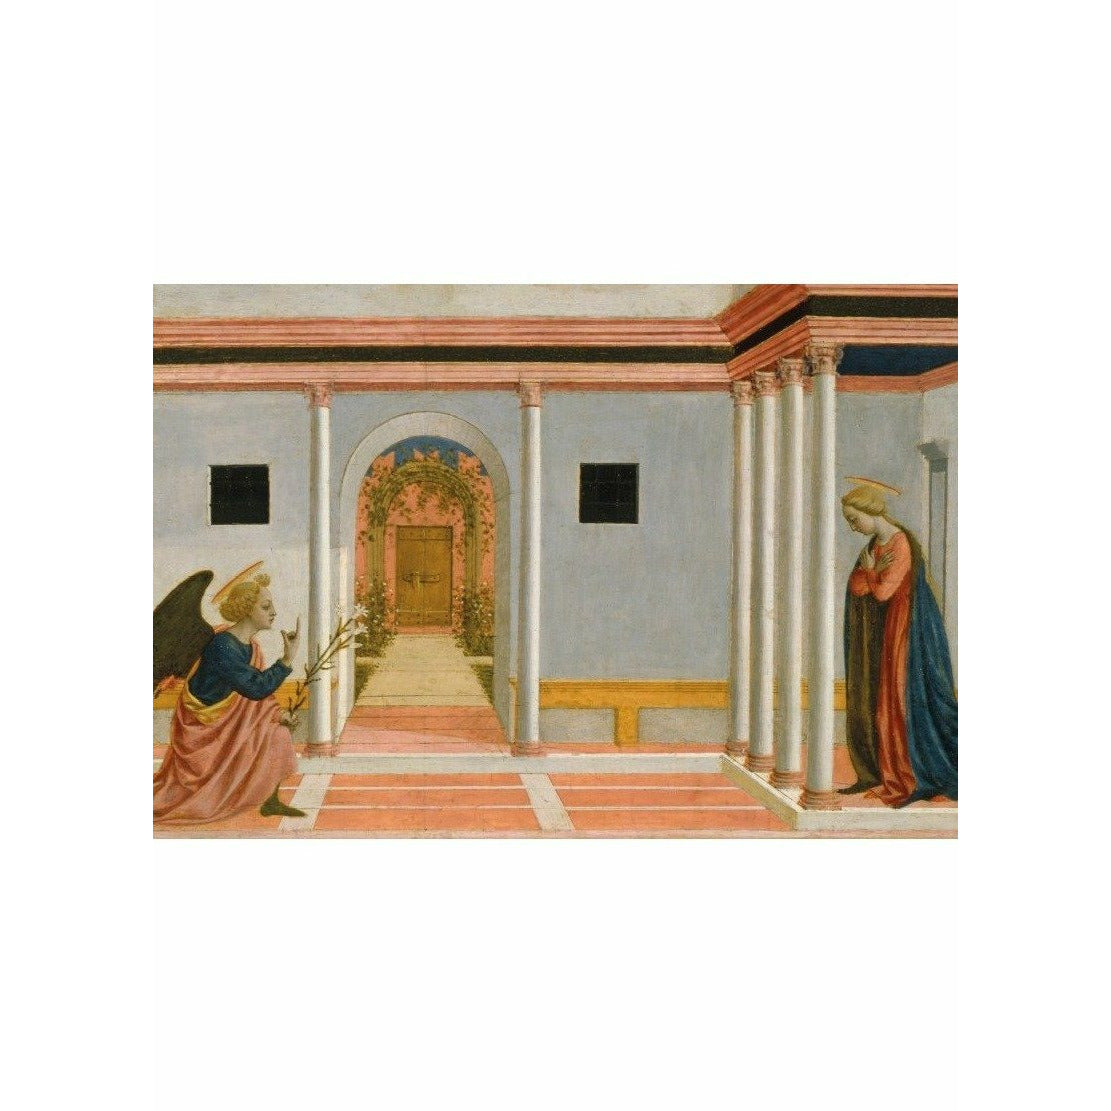 An image chosen to represent The Annunciation - Christmas card pack